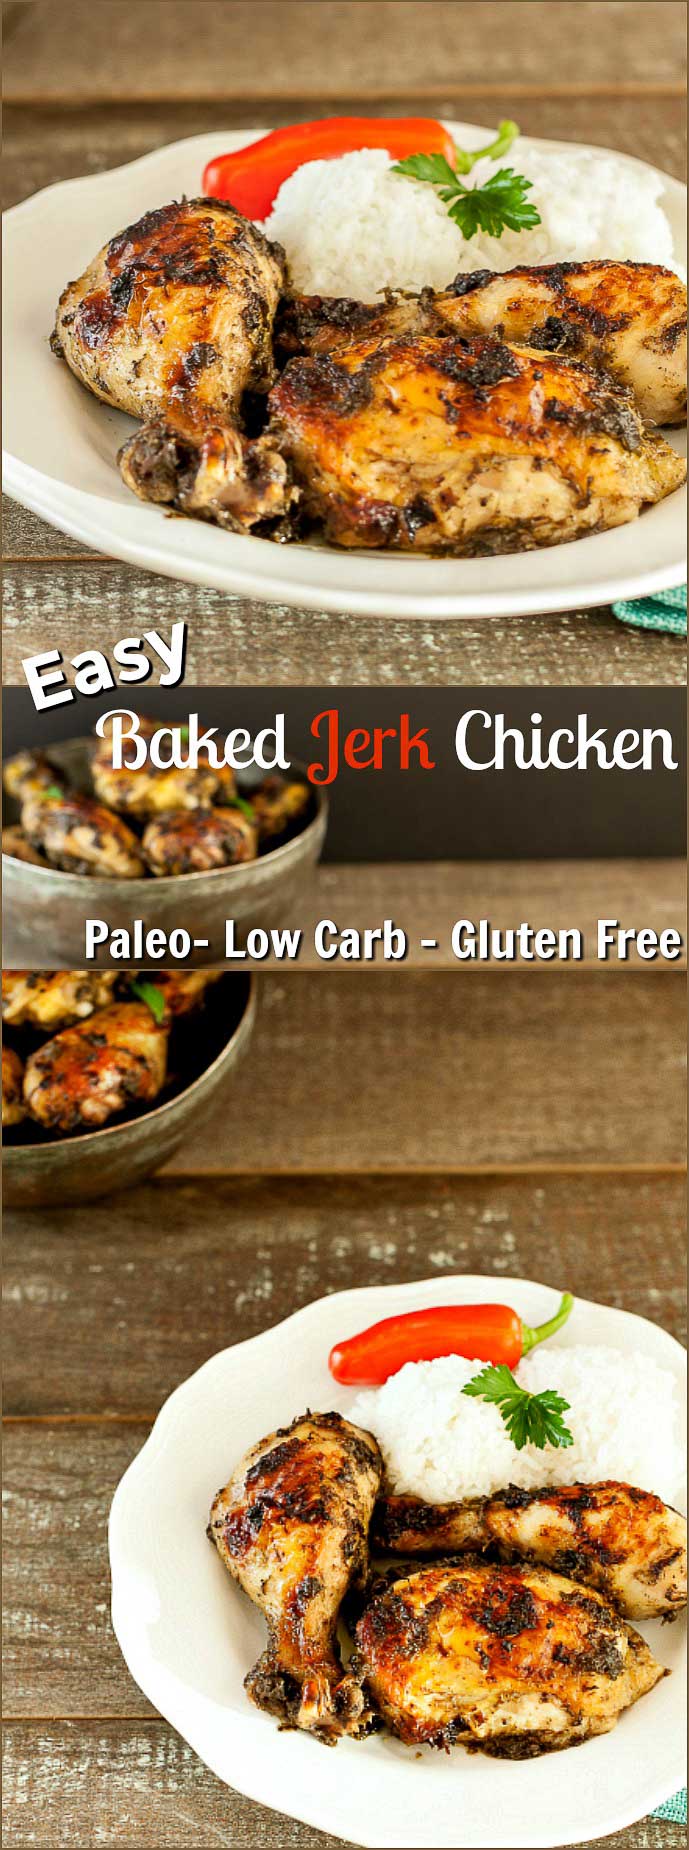 Easy Baked Jerk Chicken- Low Carb , Paleo, and Gluten Free